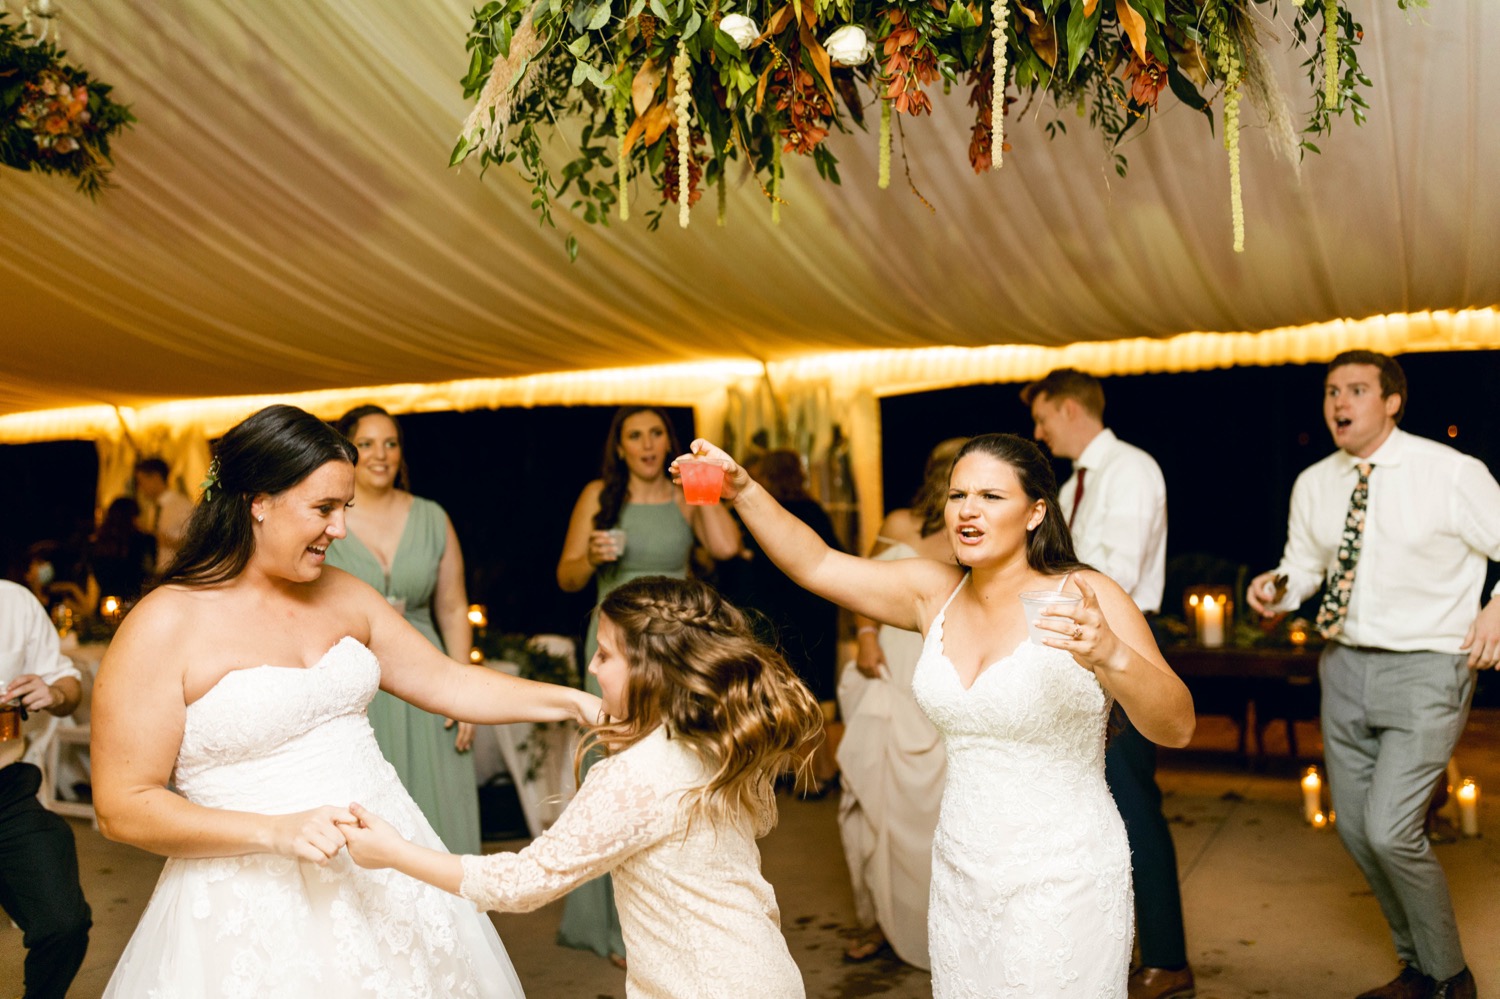 brides dancing with guests at wedding reception